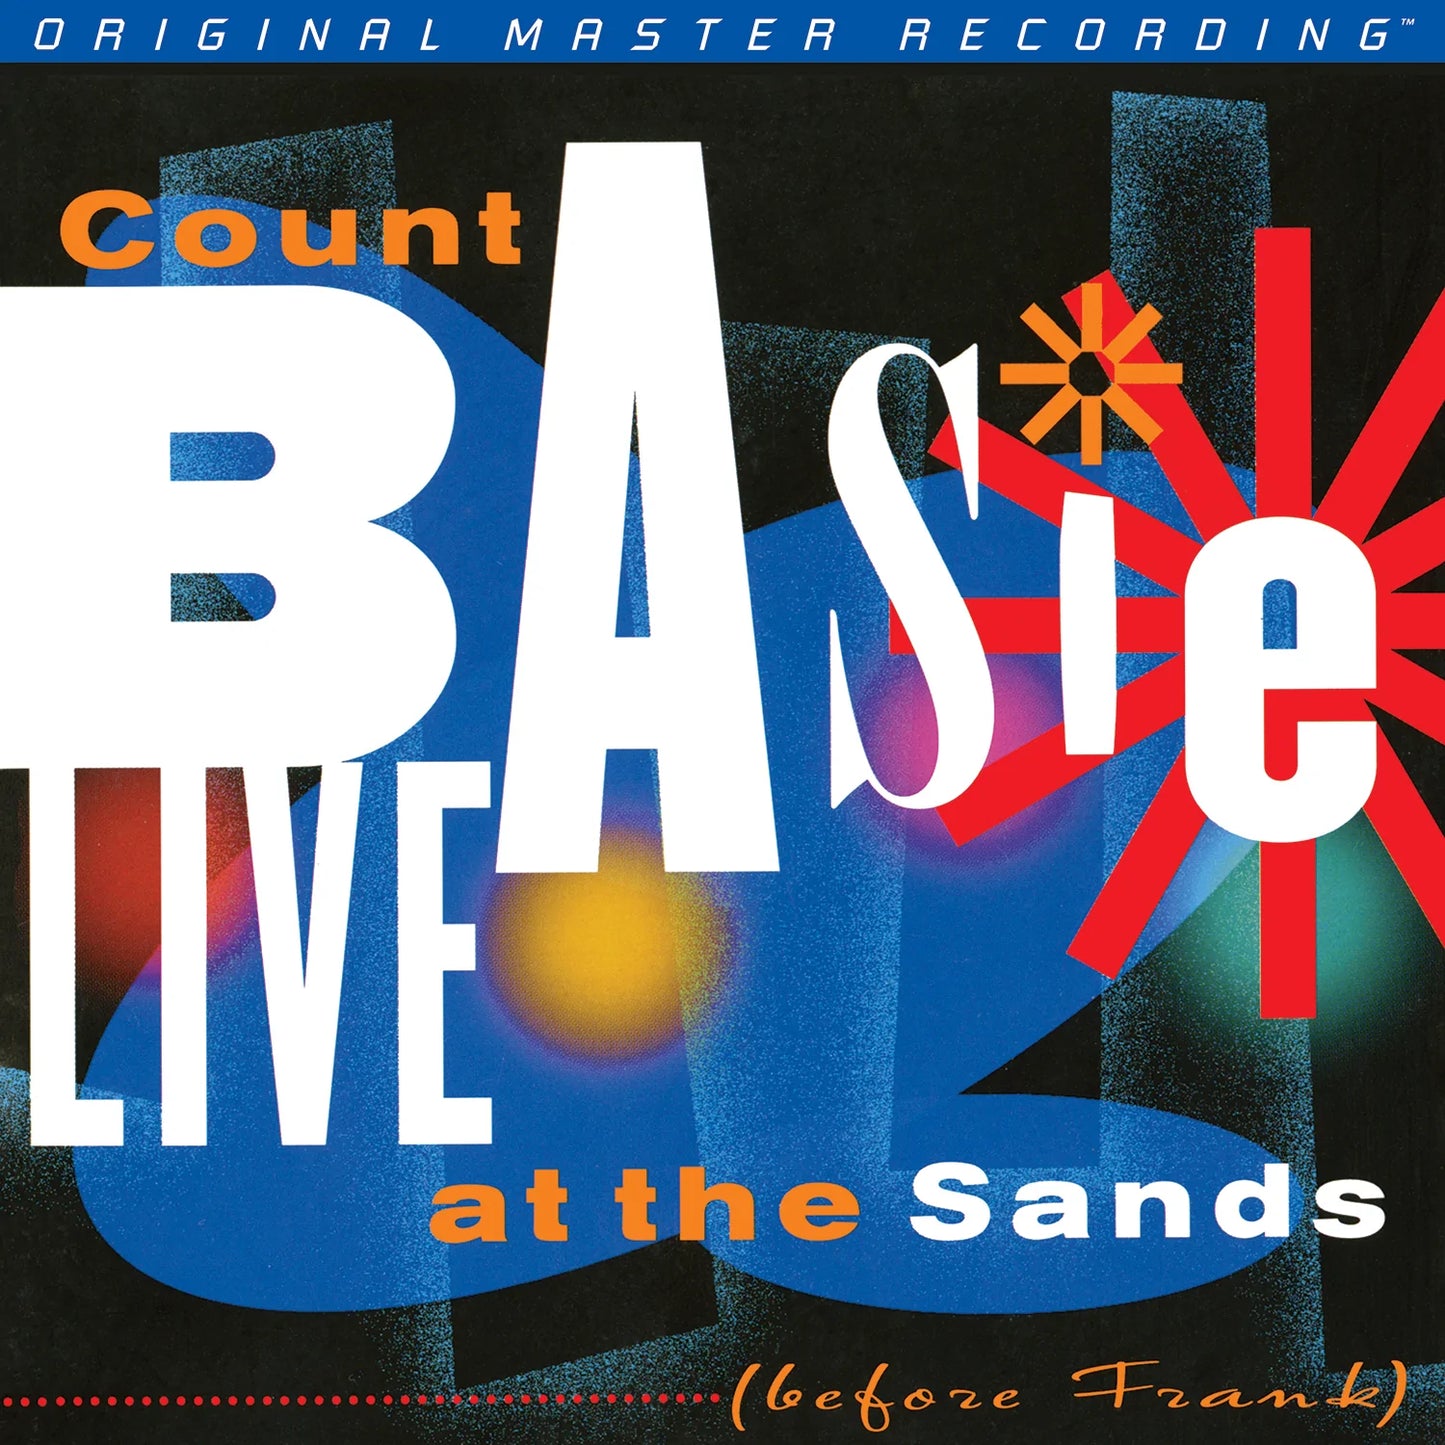 Count Basie – Live At The Sands (Before Frank) – MFSL SACD 